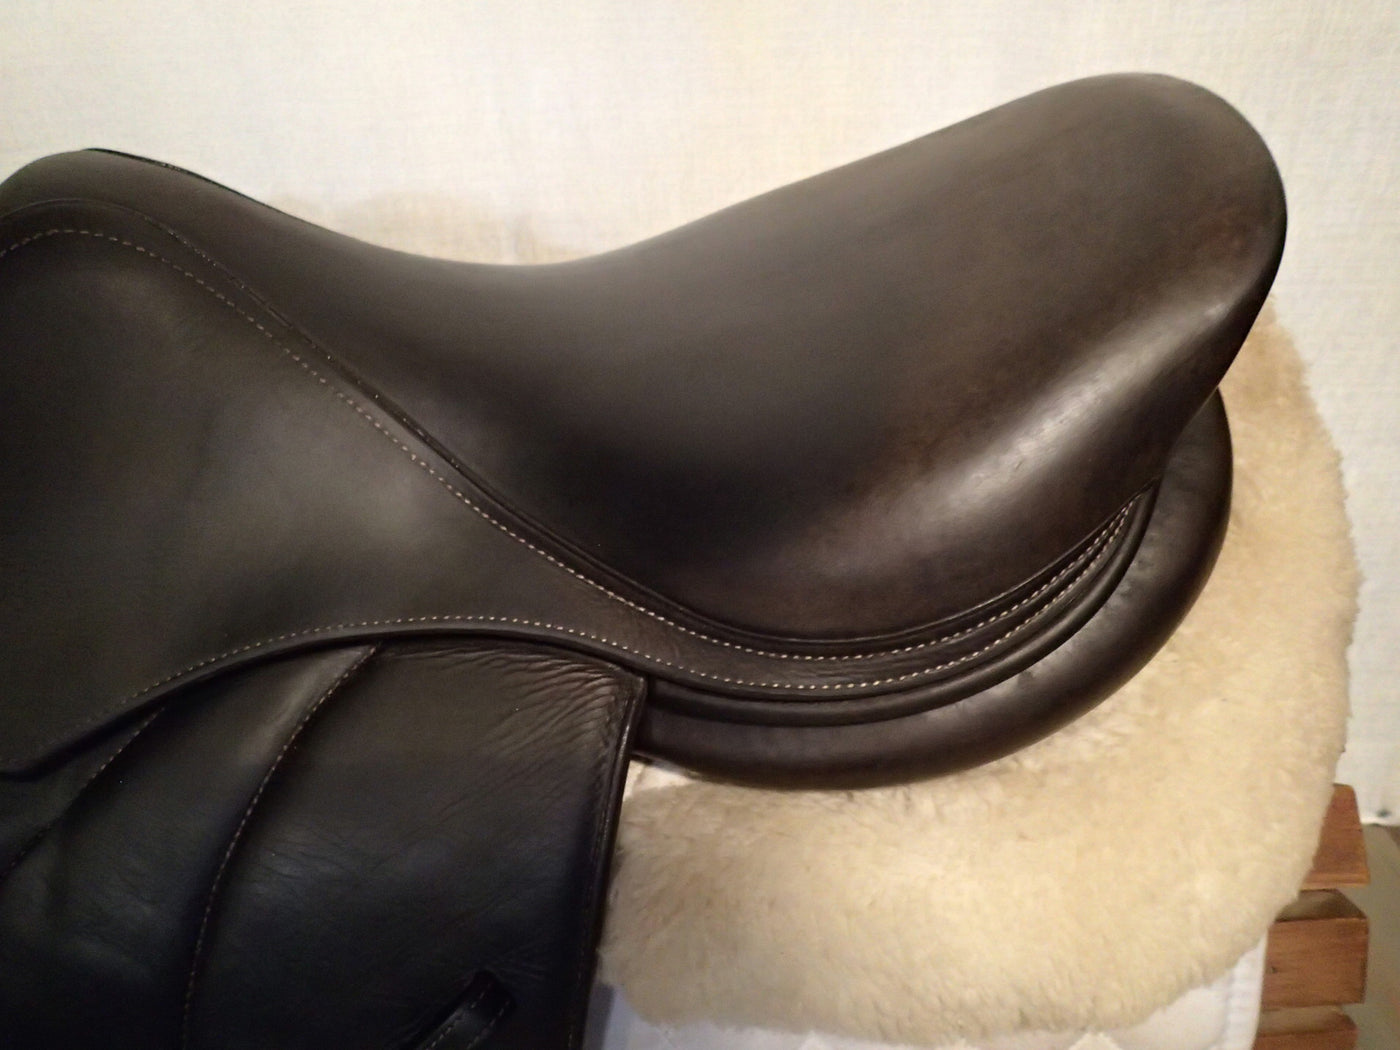 17" Voltaire Palm Beach Saddle - Full Buffalo - 2021 - 3 Flaps - 5" dot to dot - FIN Panels